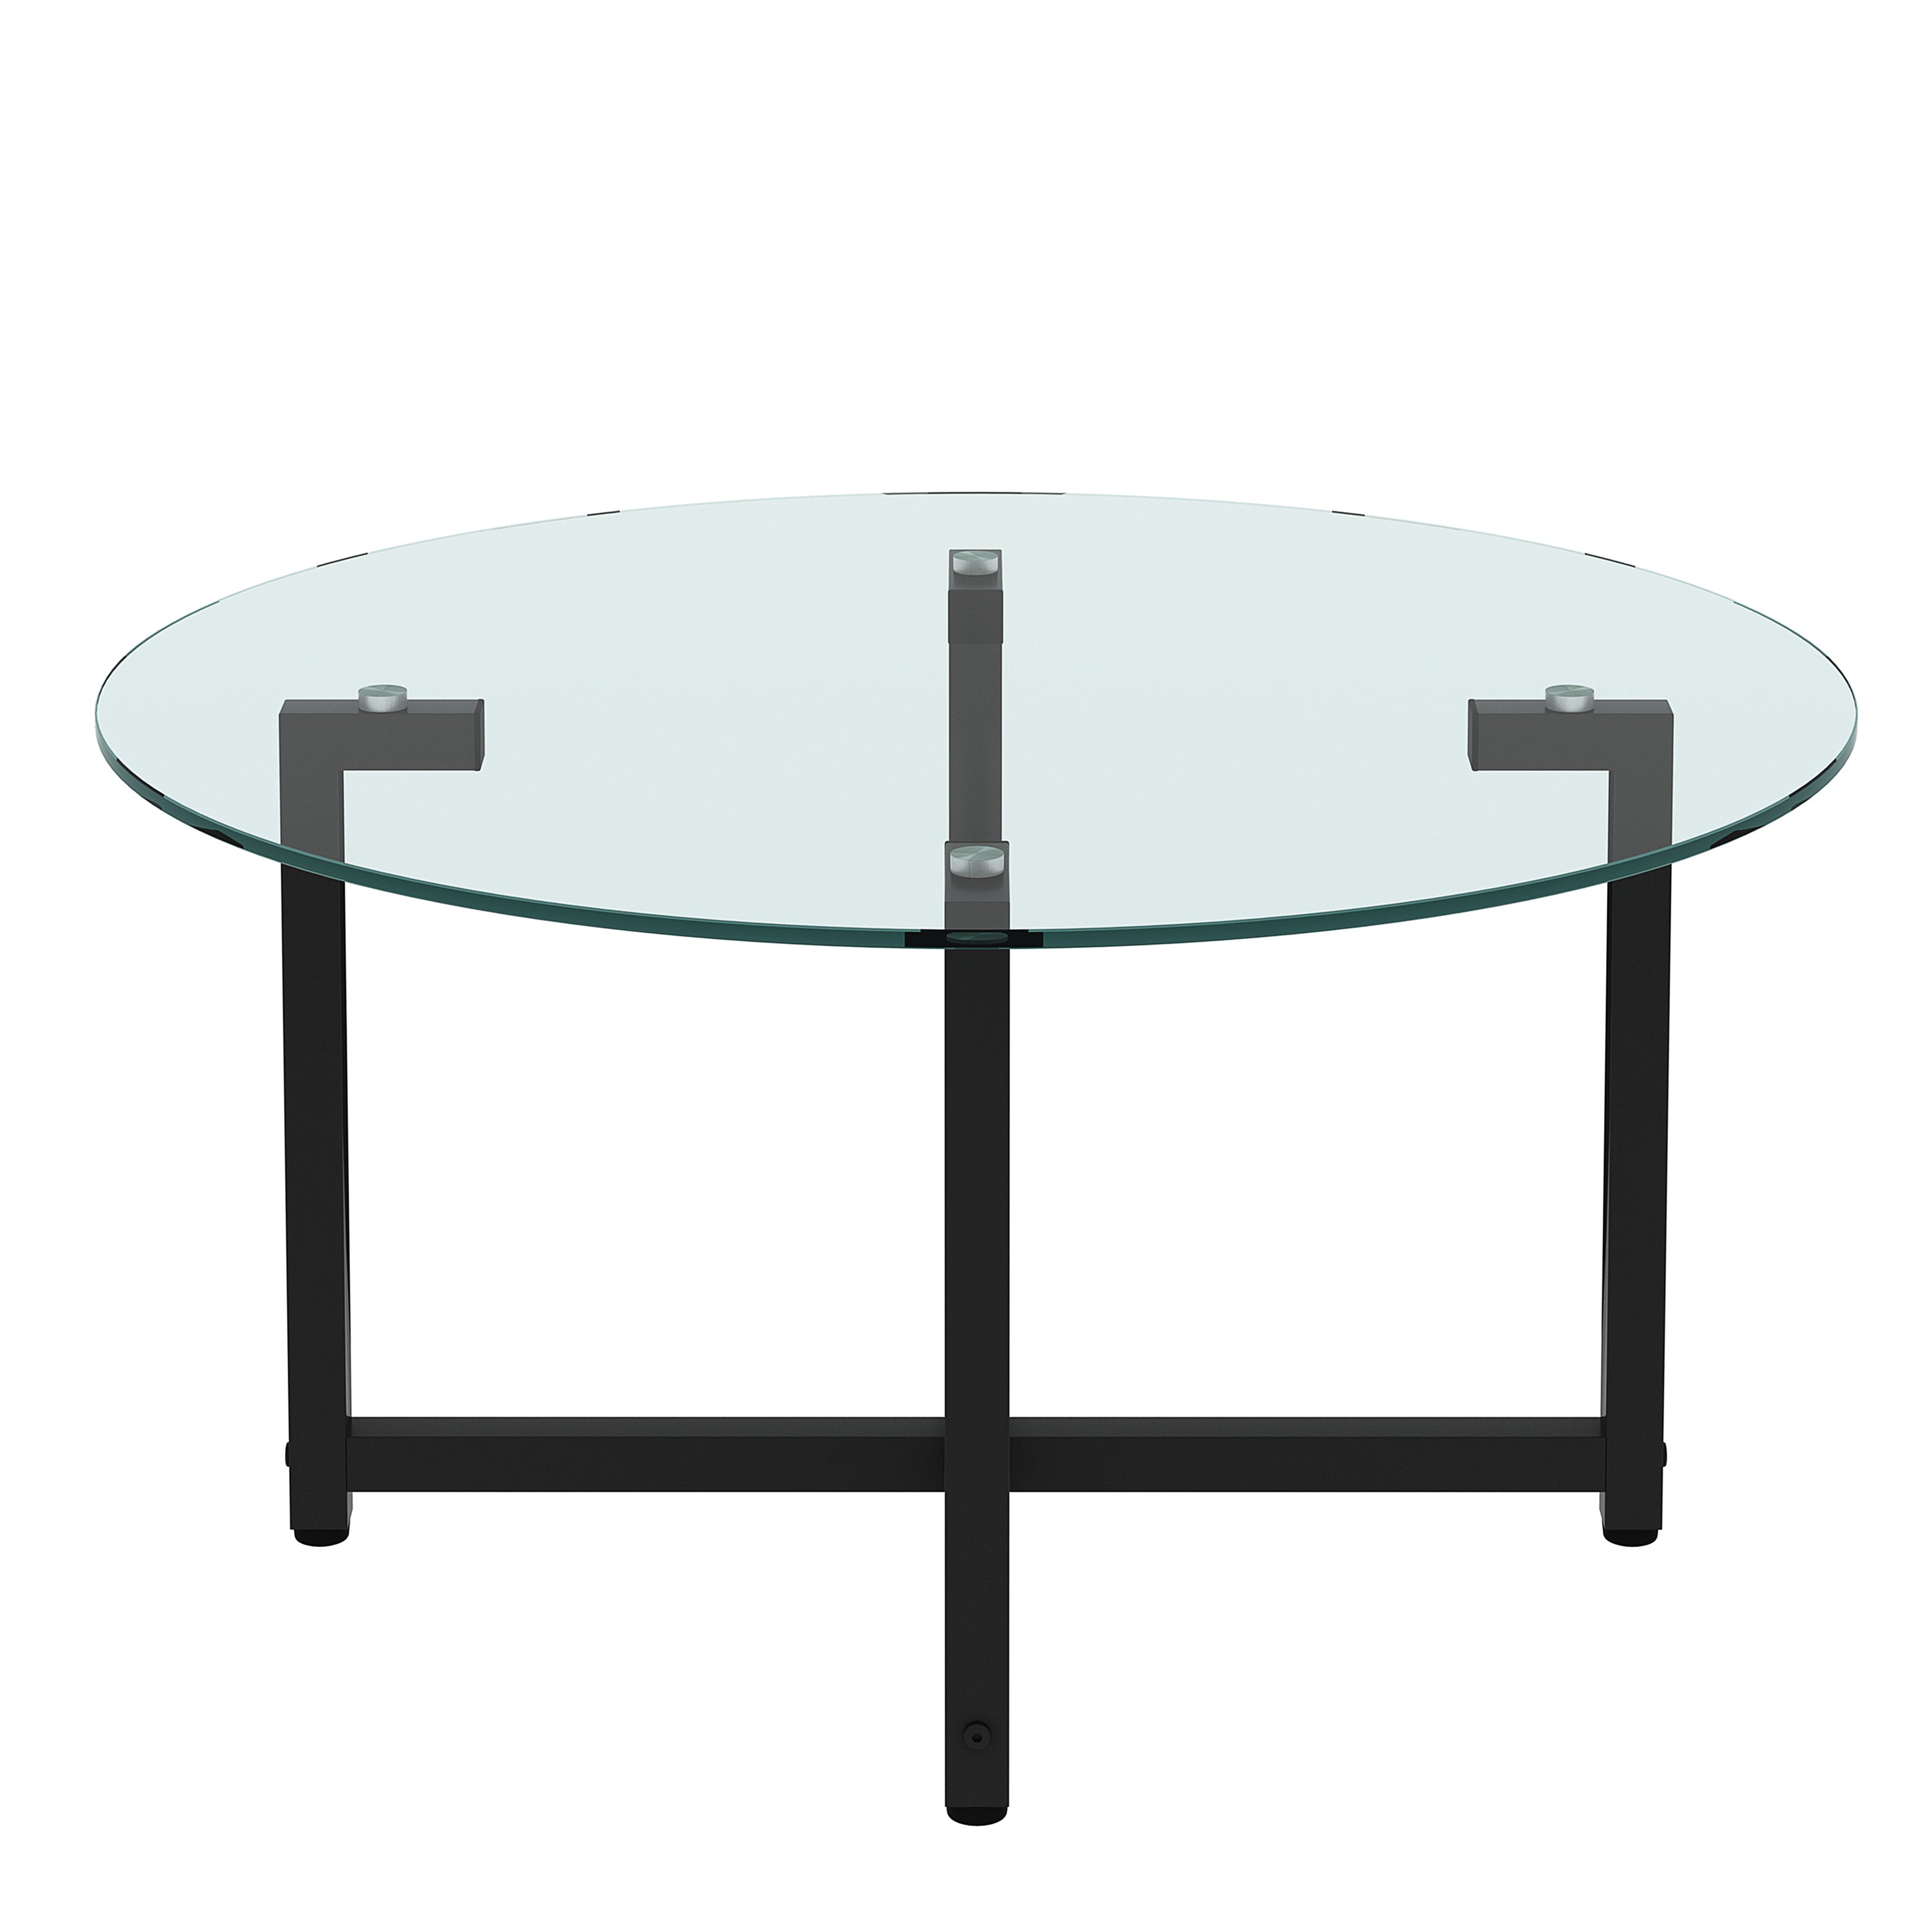 35.5" Round Clear Tempered Glass Coffee Table